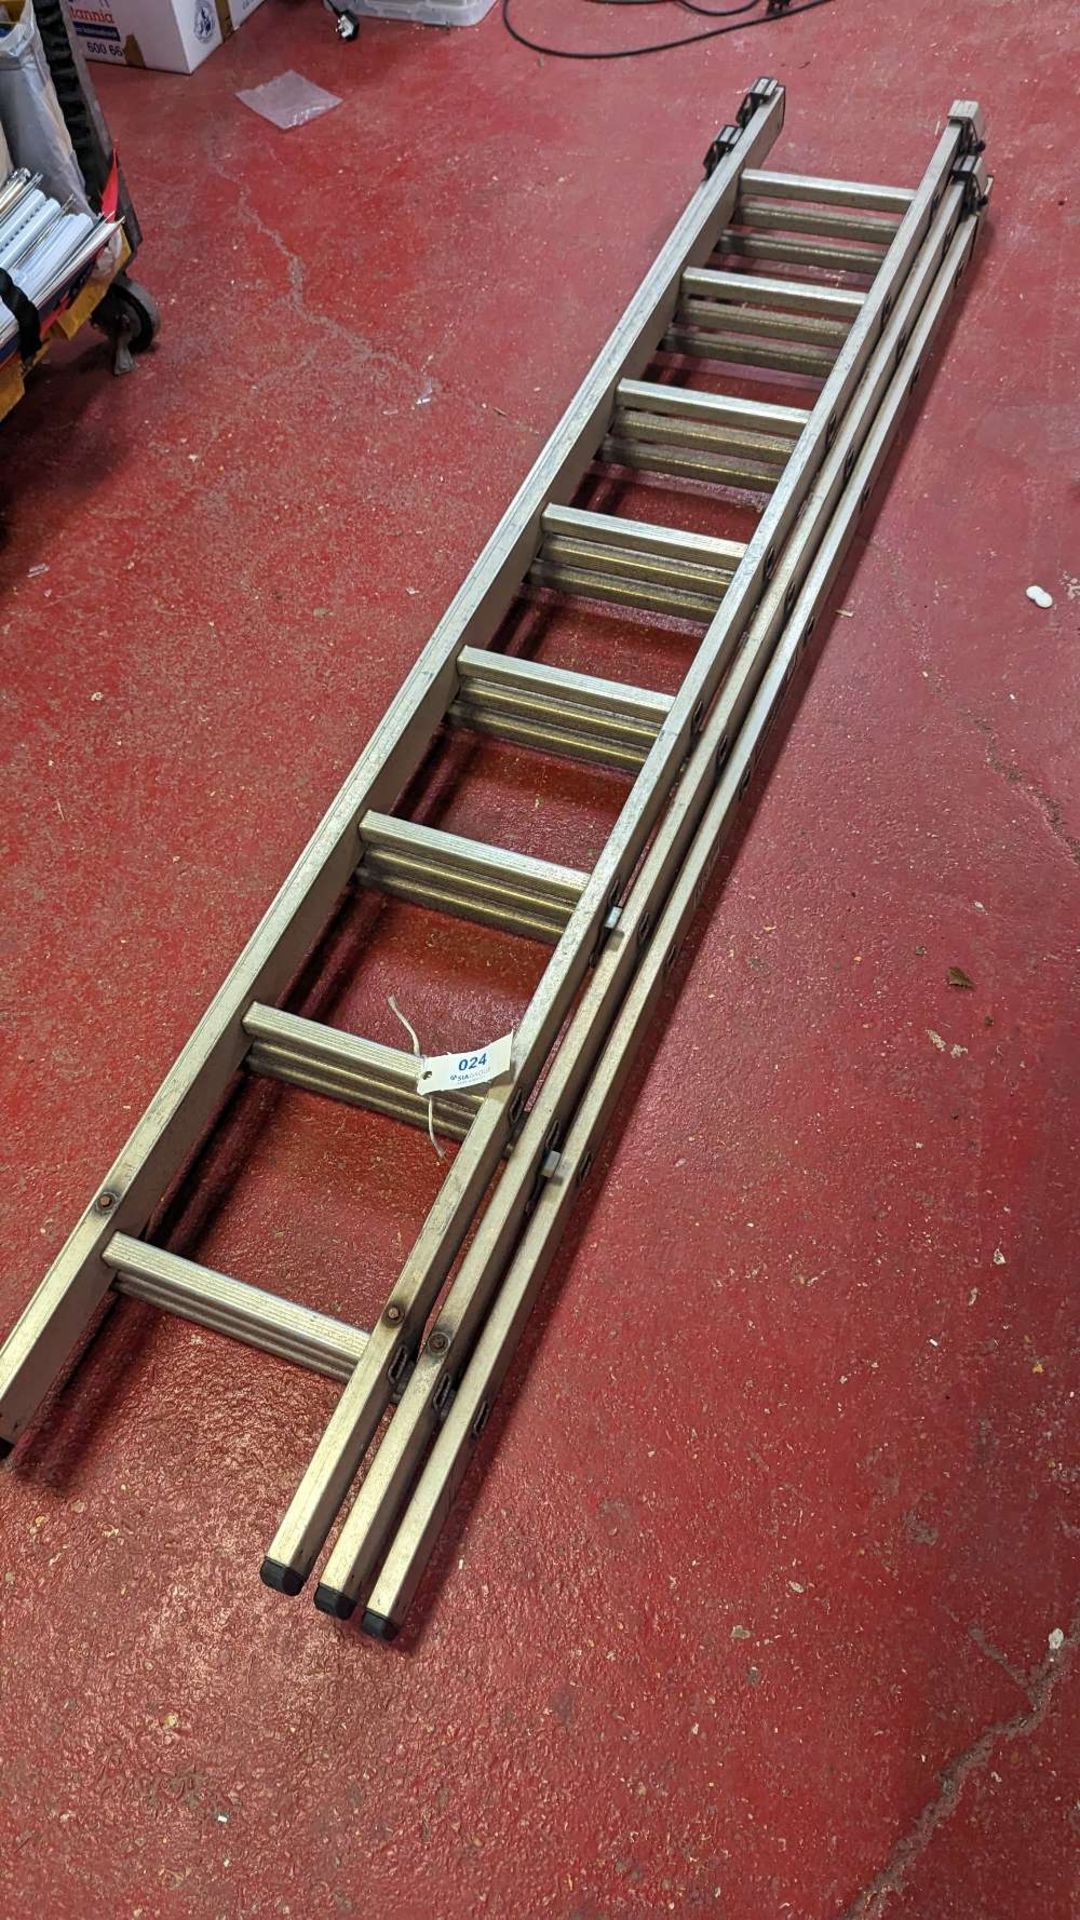 Wickes professional three section extension ladder - Image 2 of 3